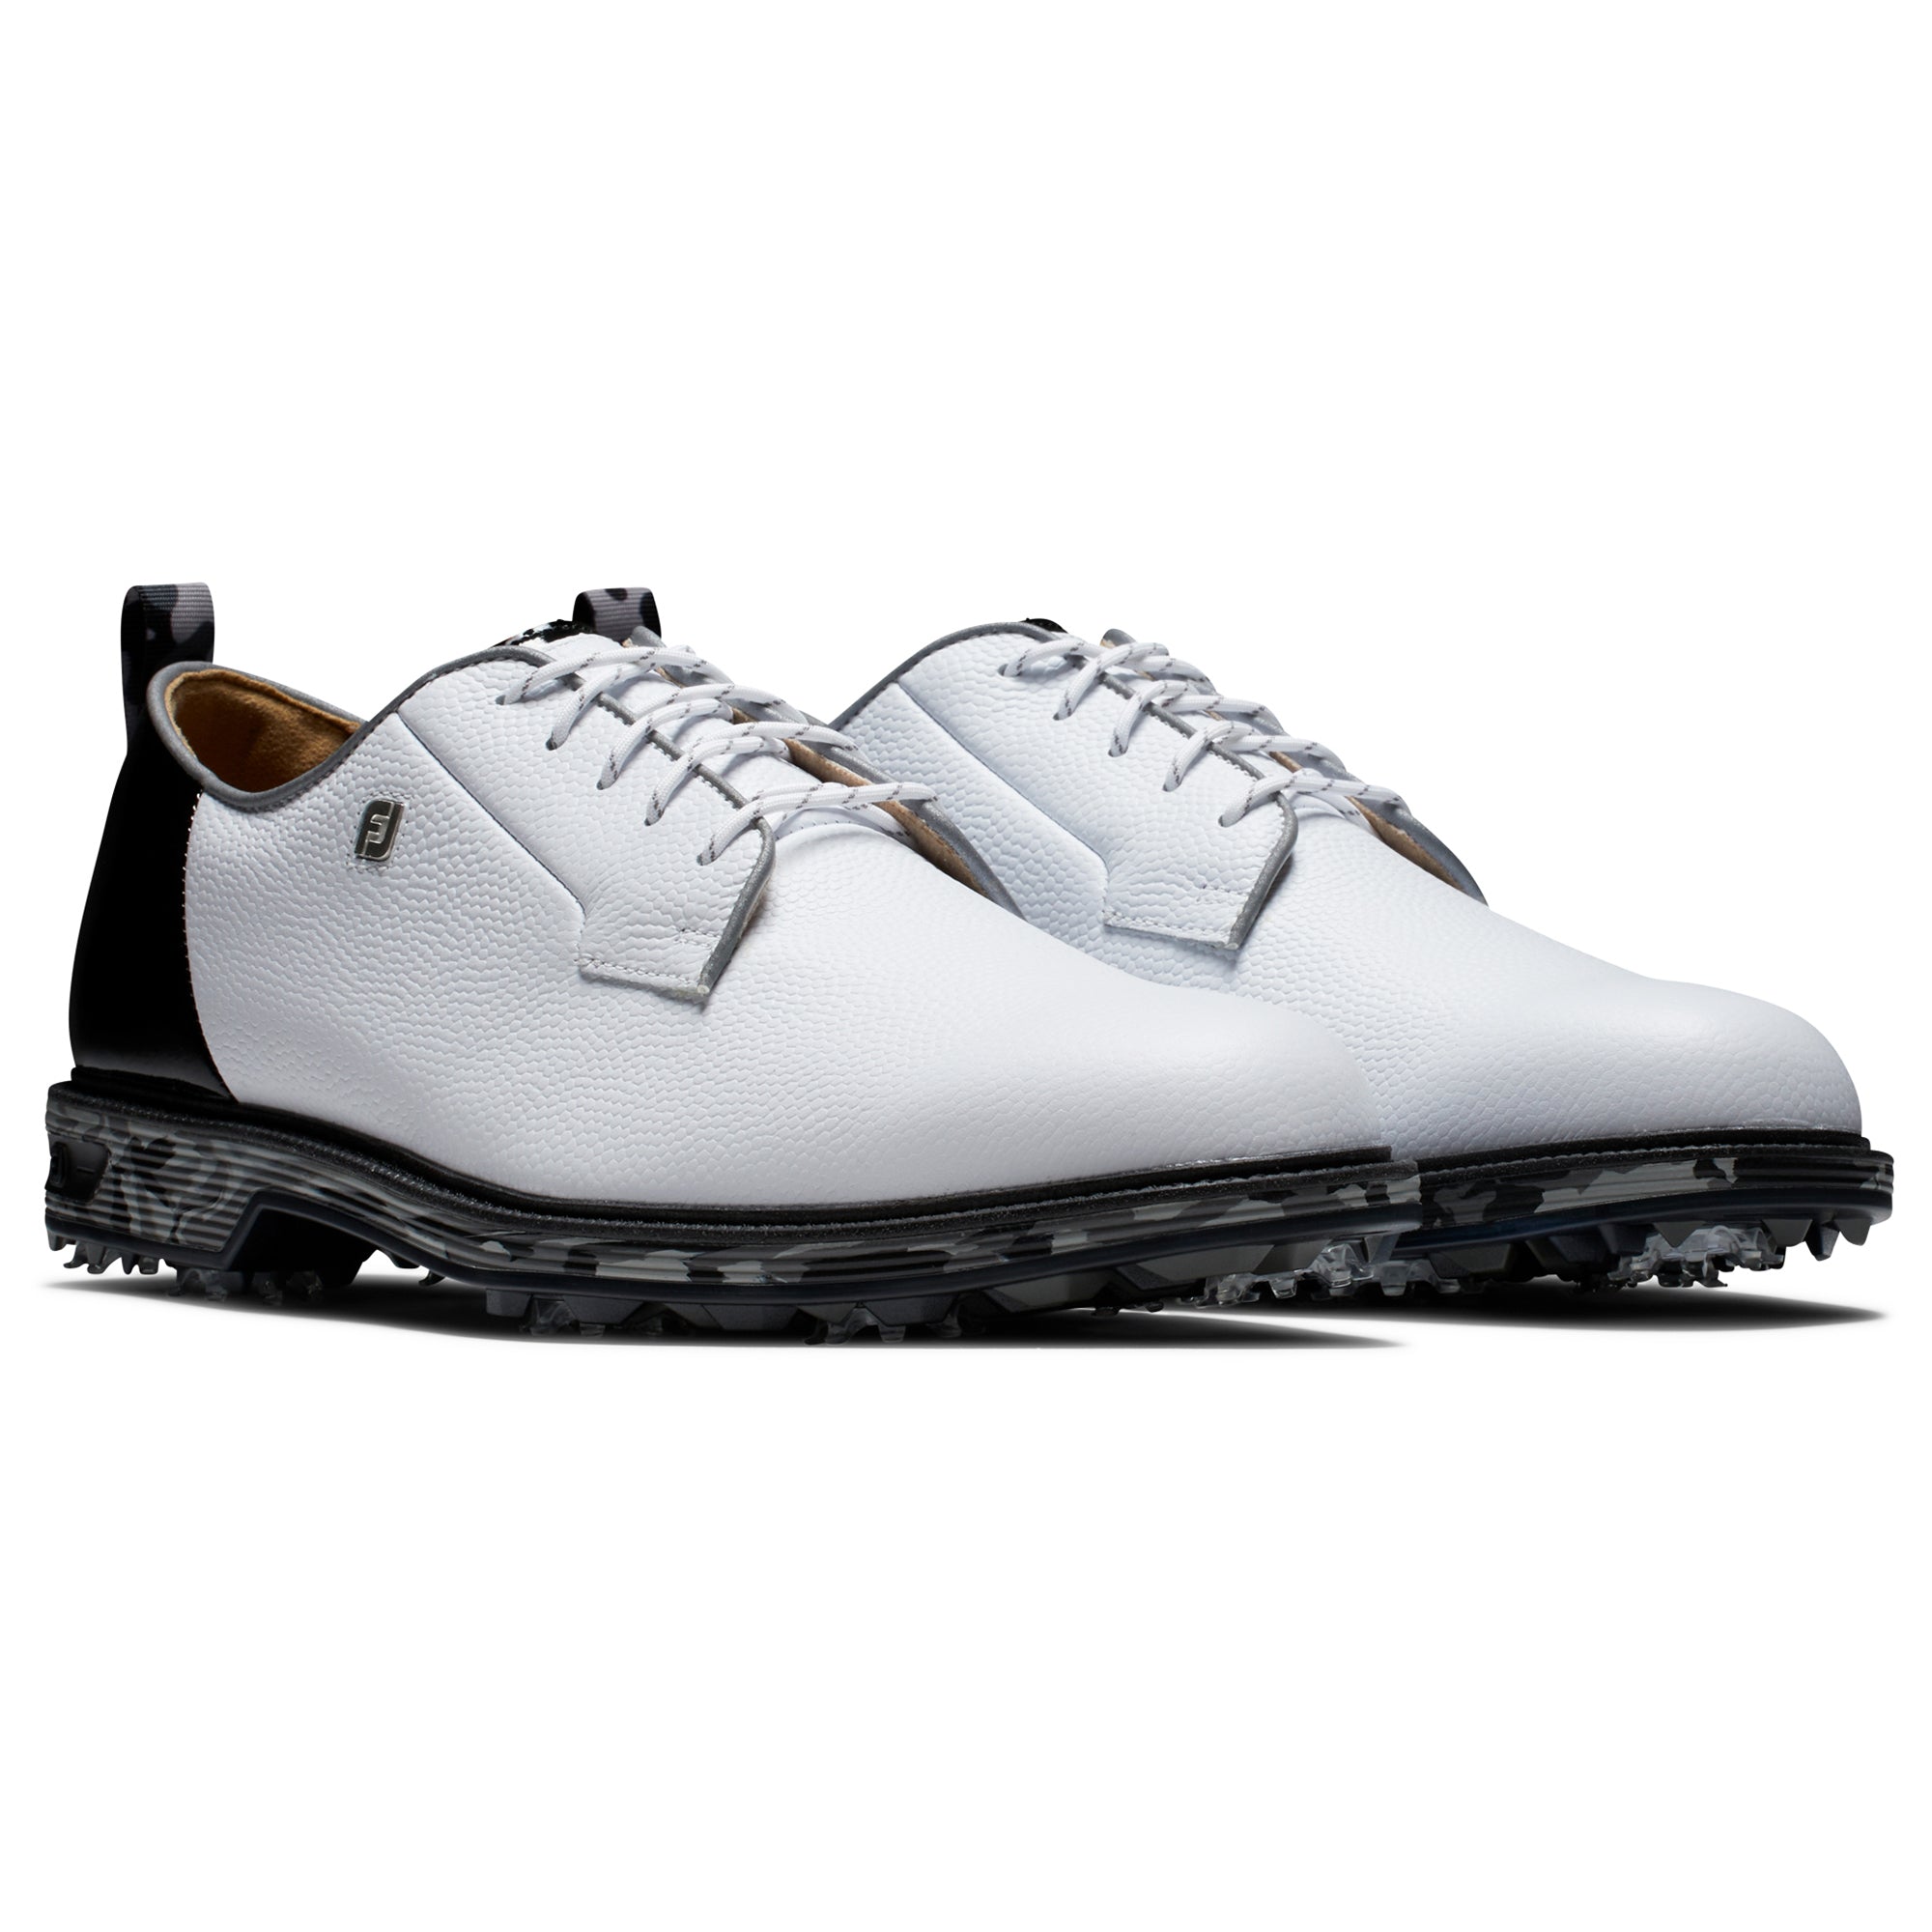 FootJoy x Todd Snyder Premiere Series Field LE Golf Shoes